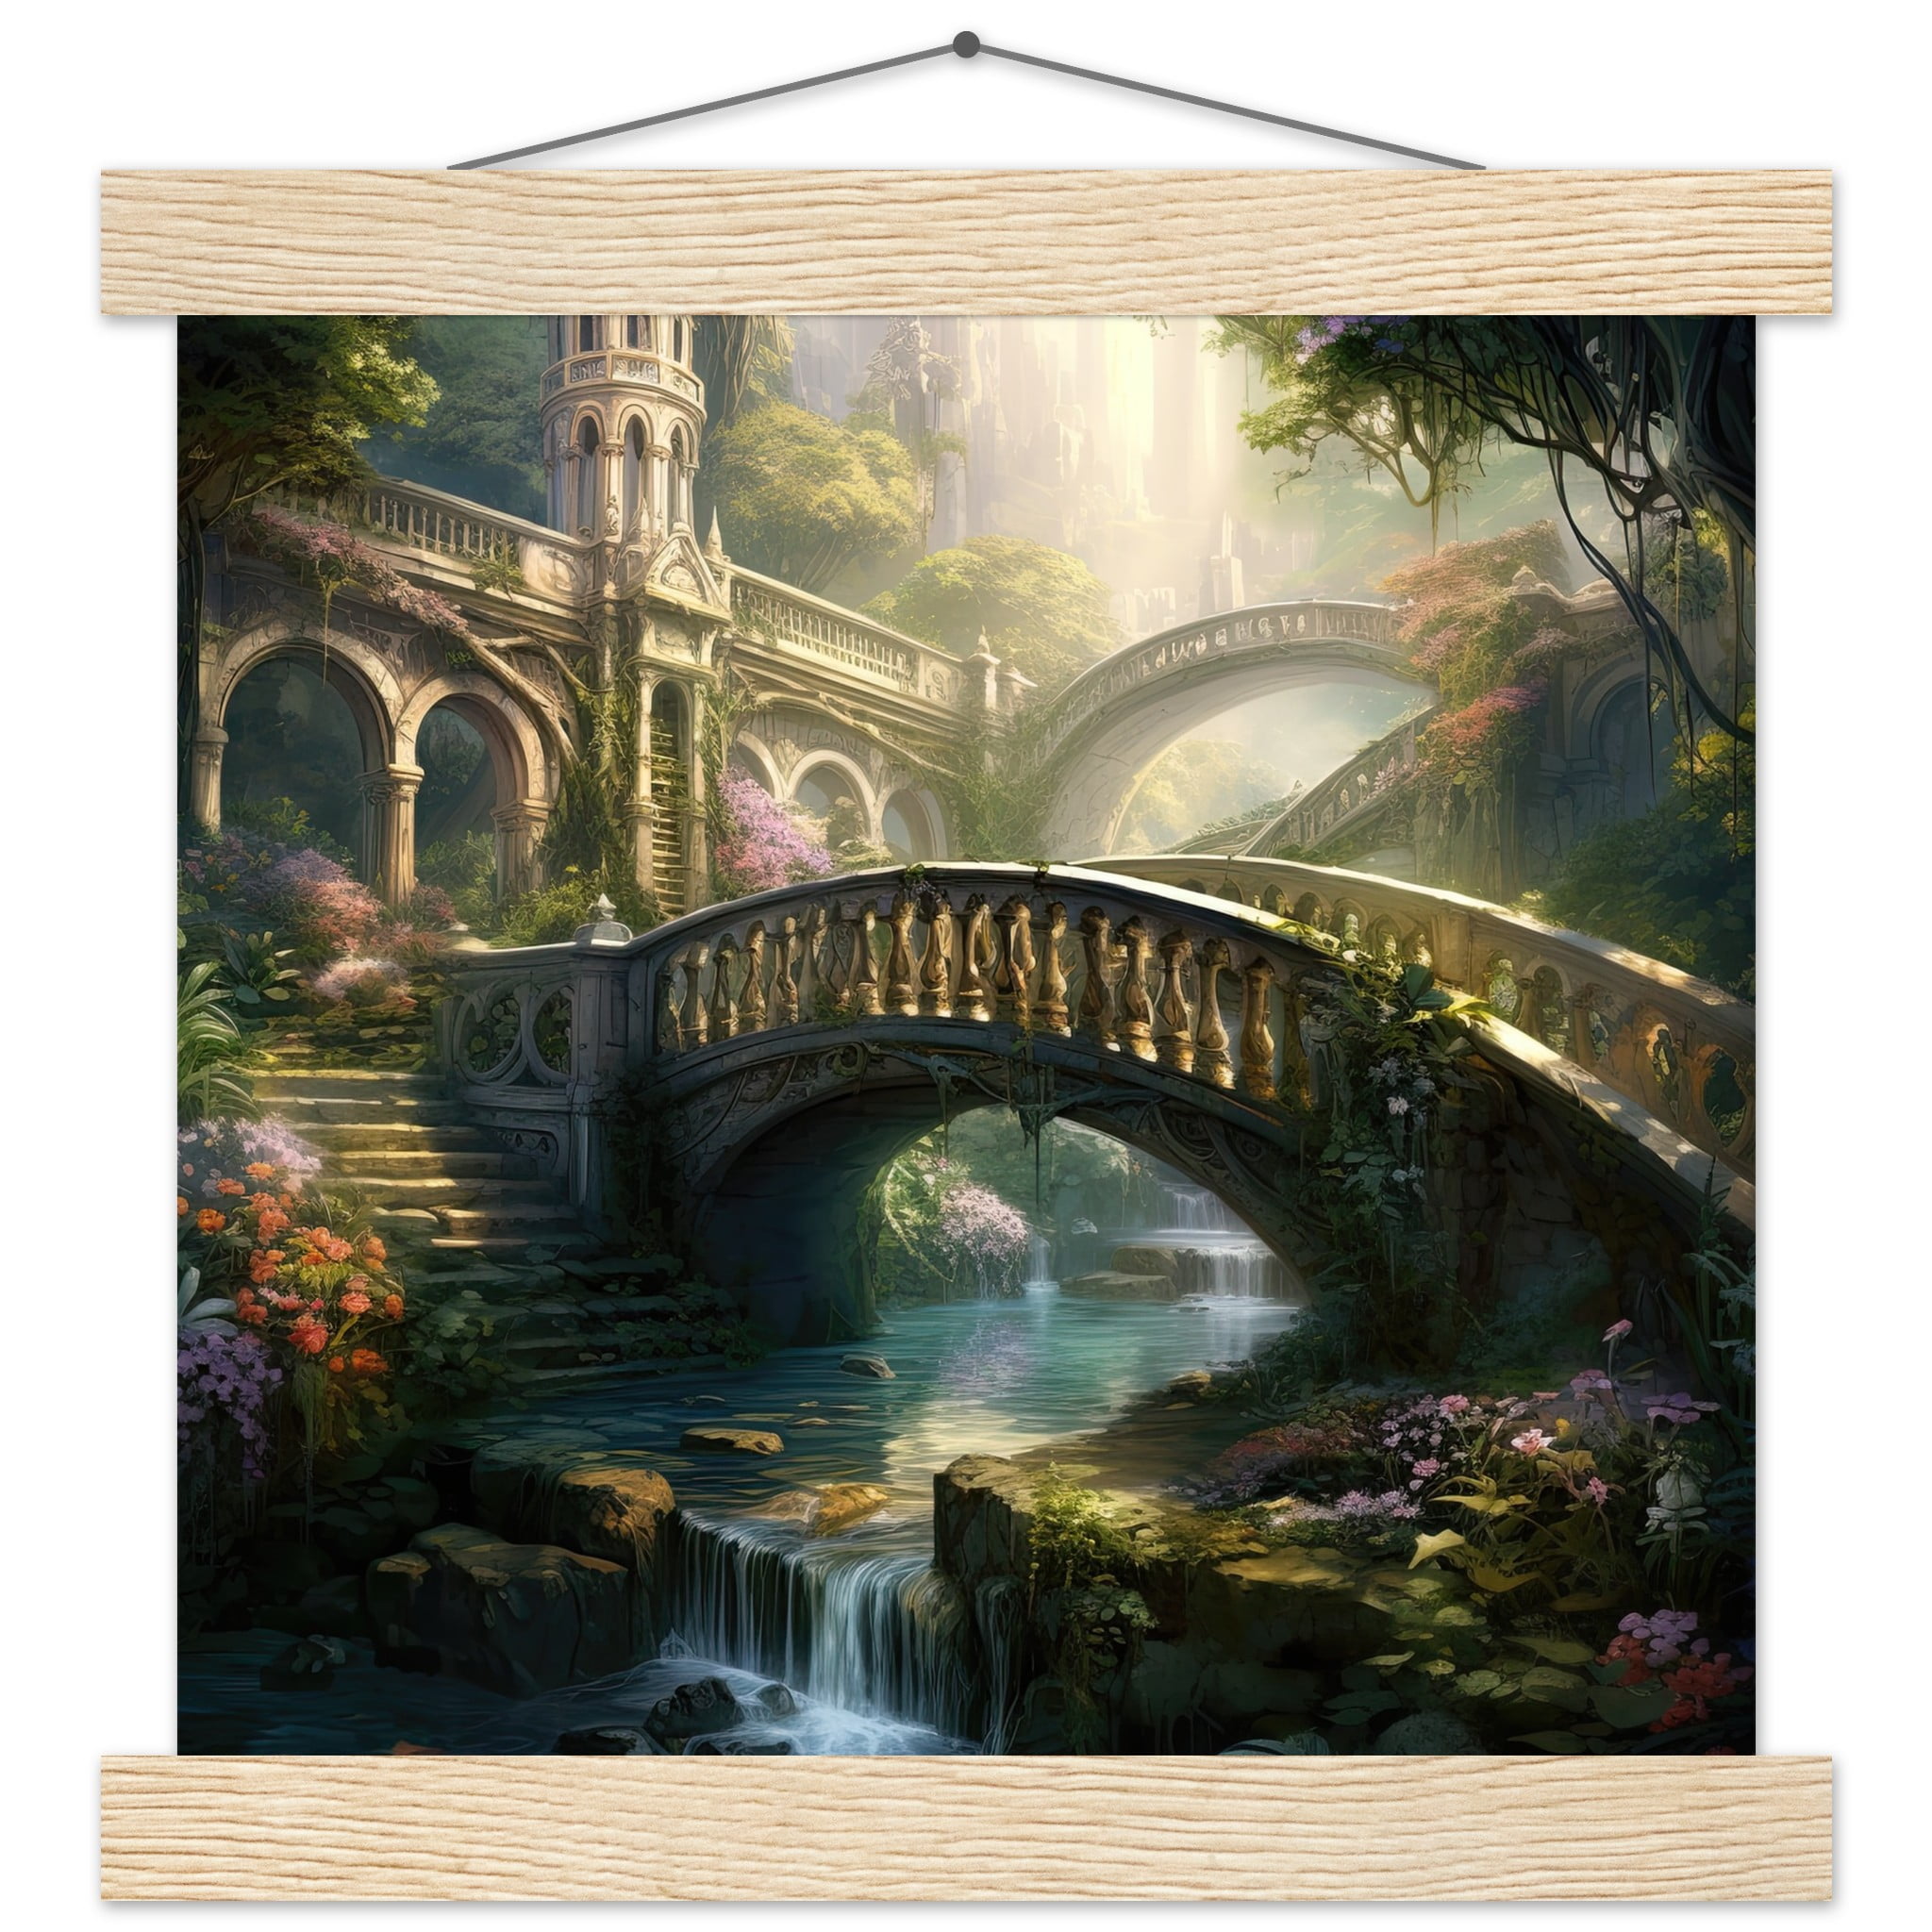 Bridge to the Kingdom of Paradise Art Print with Hanger – 25×25 cm / 10×10″, Natural wood wall hanger